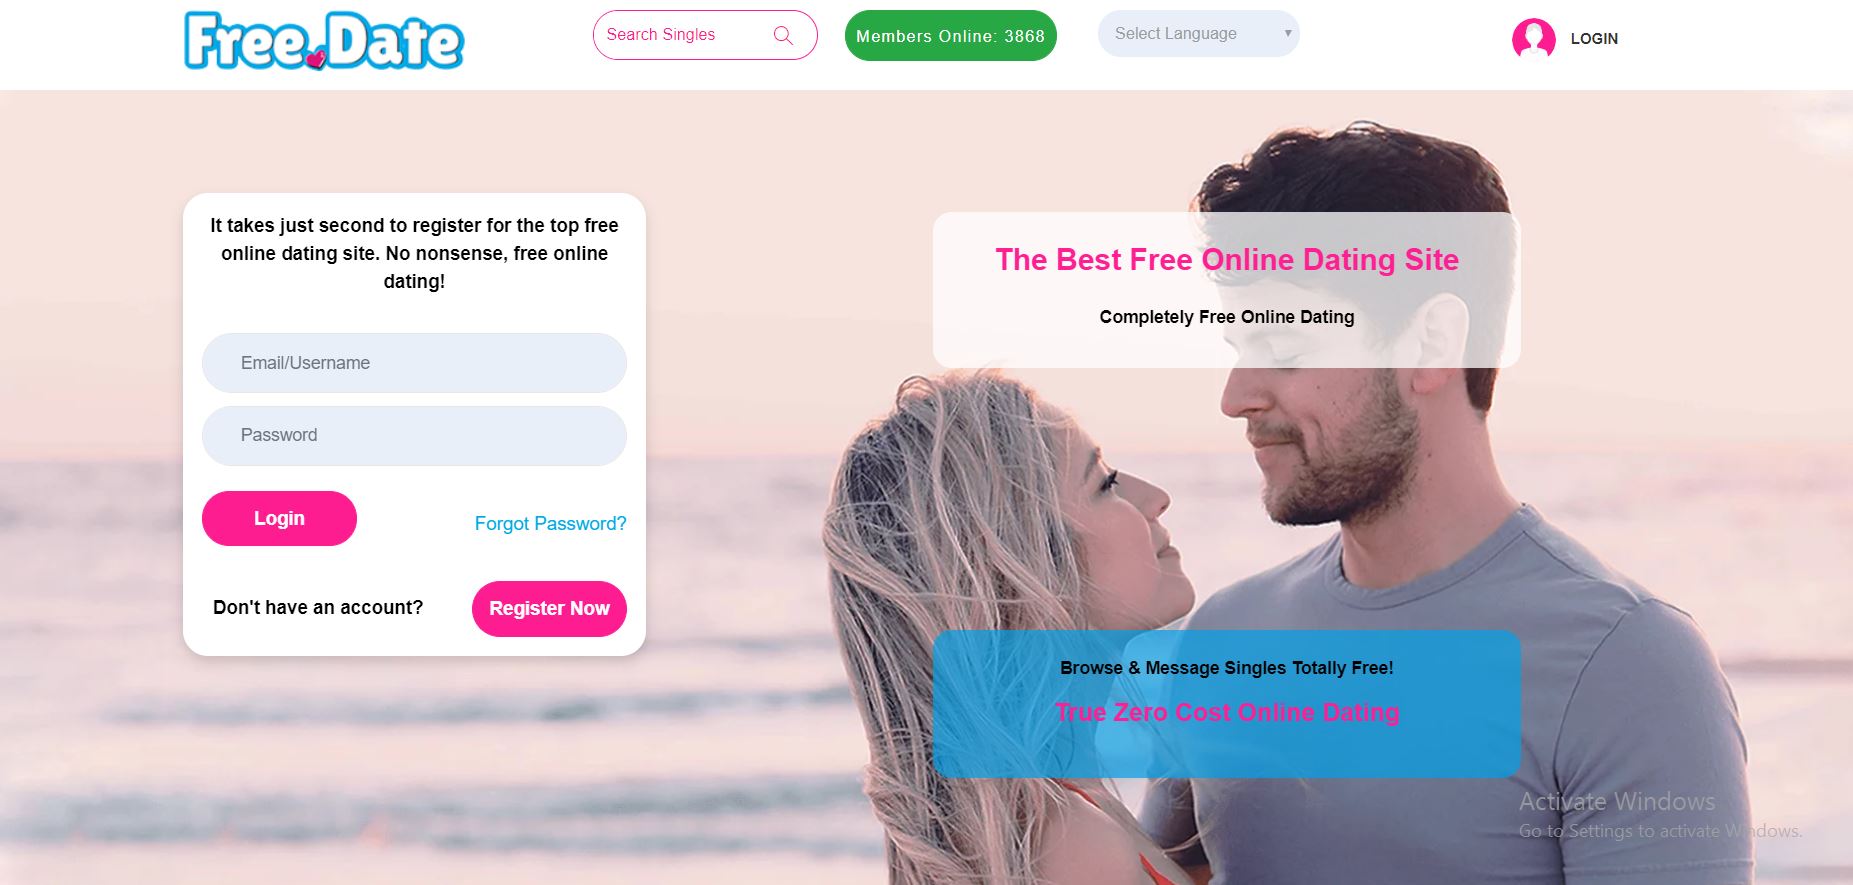 Totally free dating sites no sign up